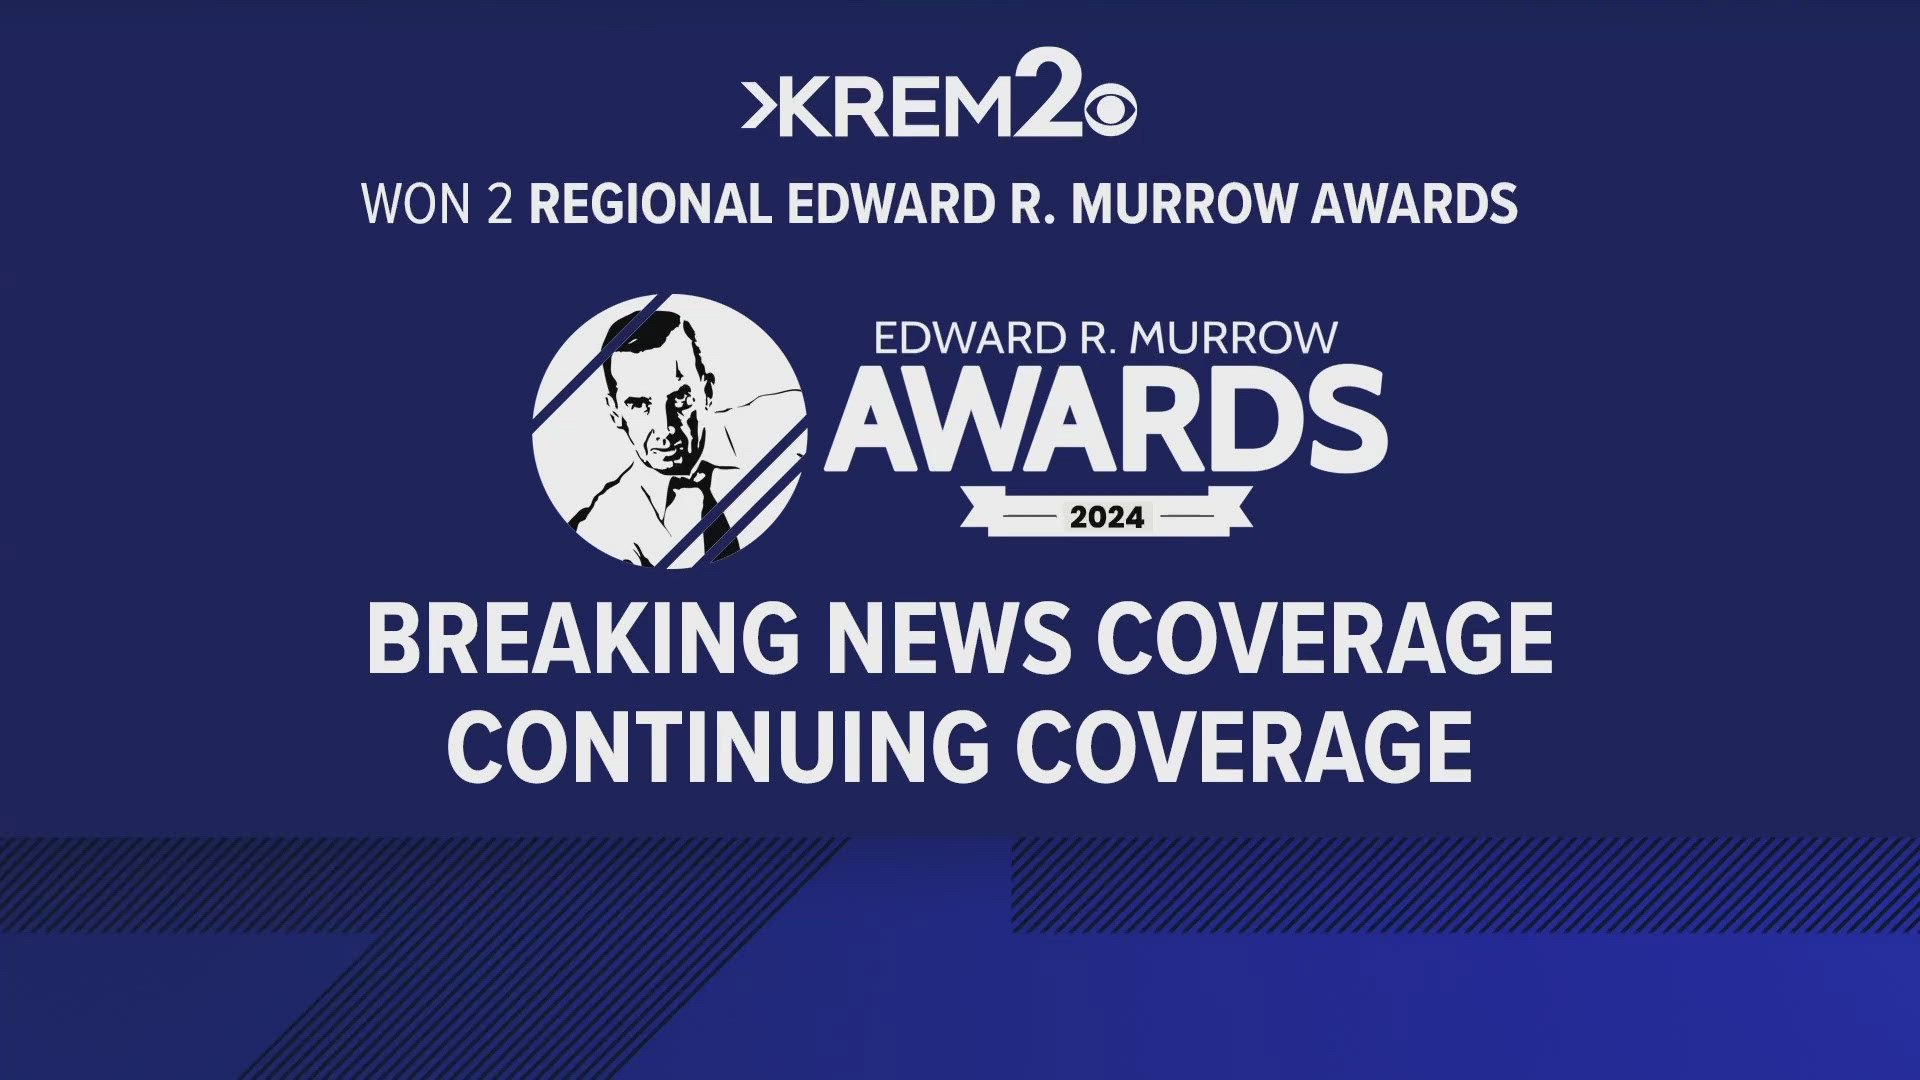 Our news team took home wins in the breaking news and continuing coverage categories.